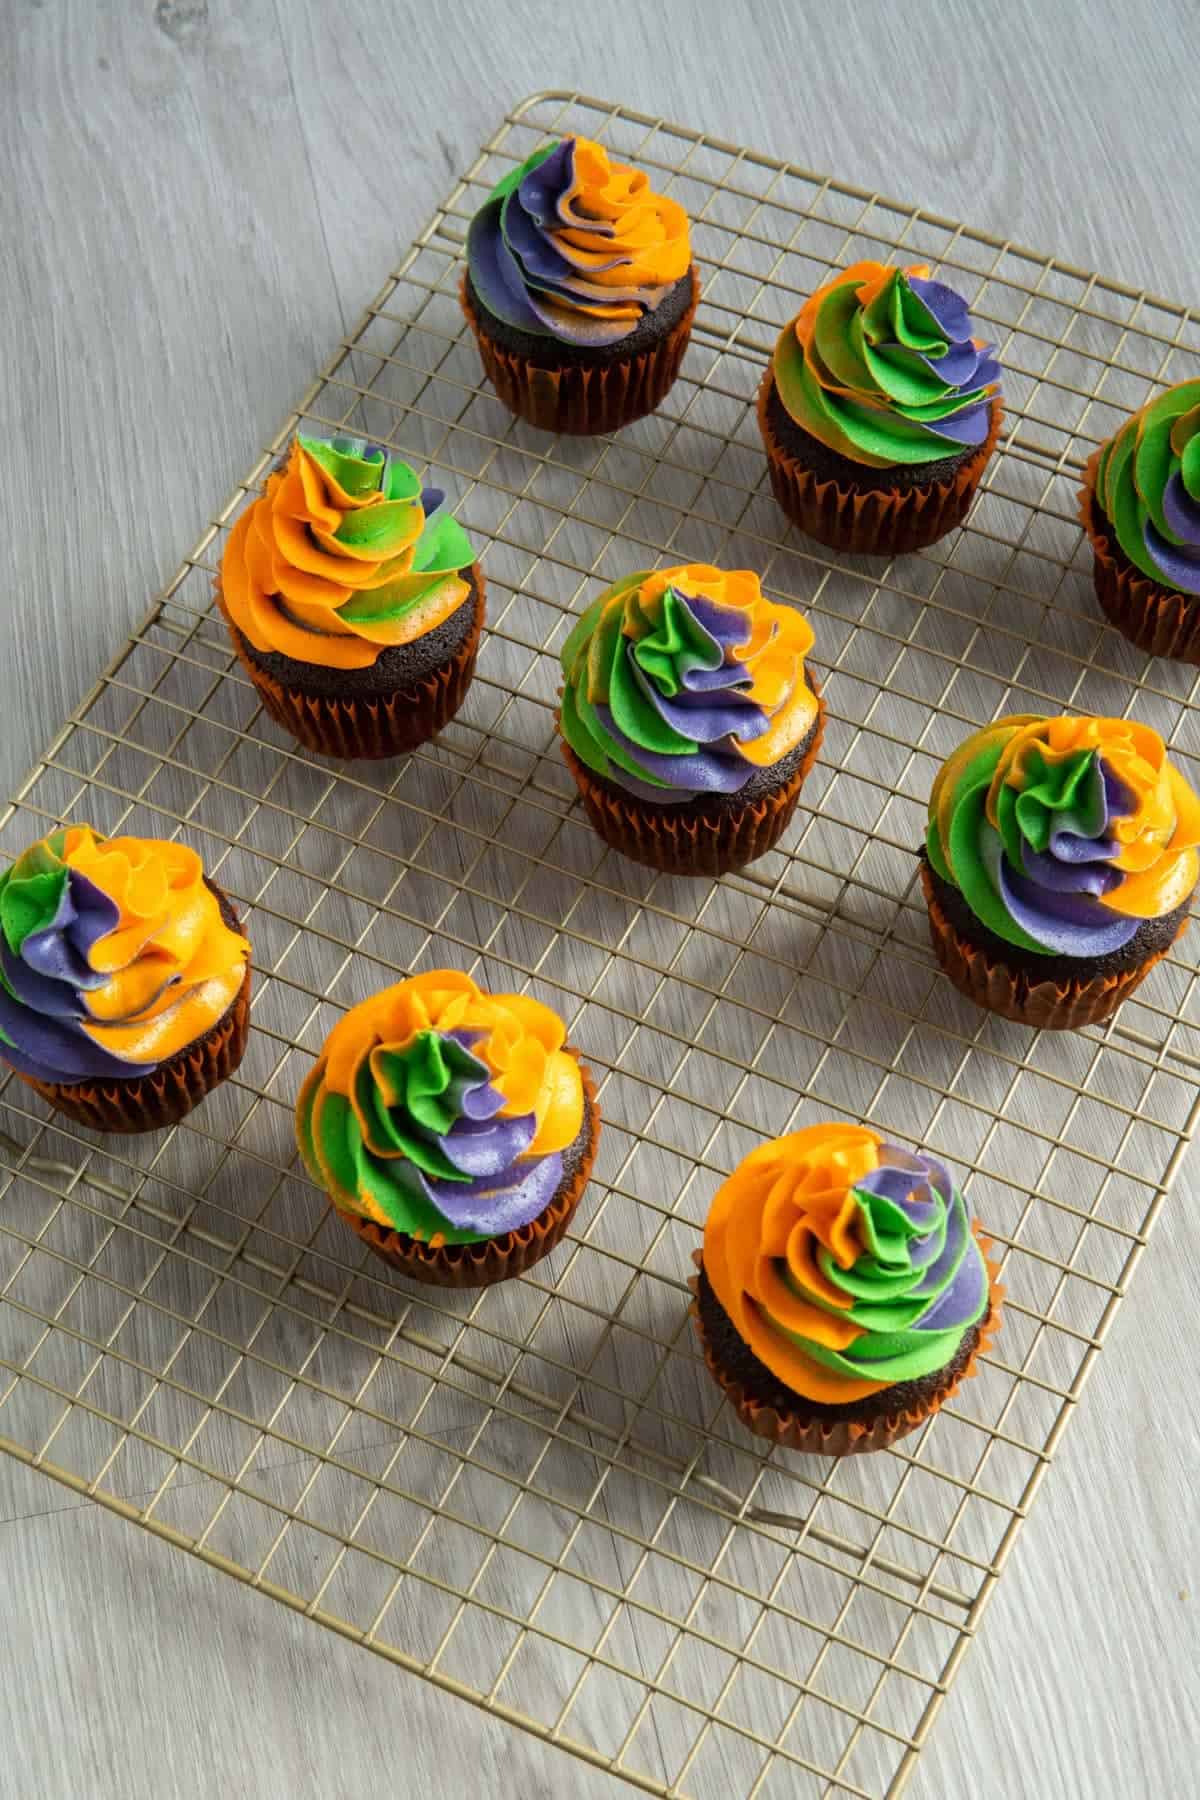 Halloween cupcakes topped with swirled orange, green, and purple frosting.